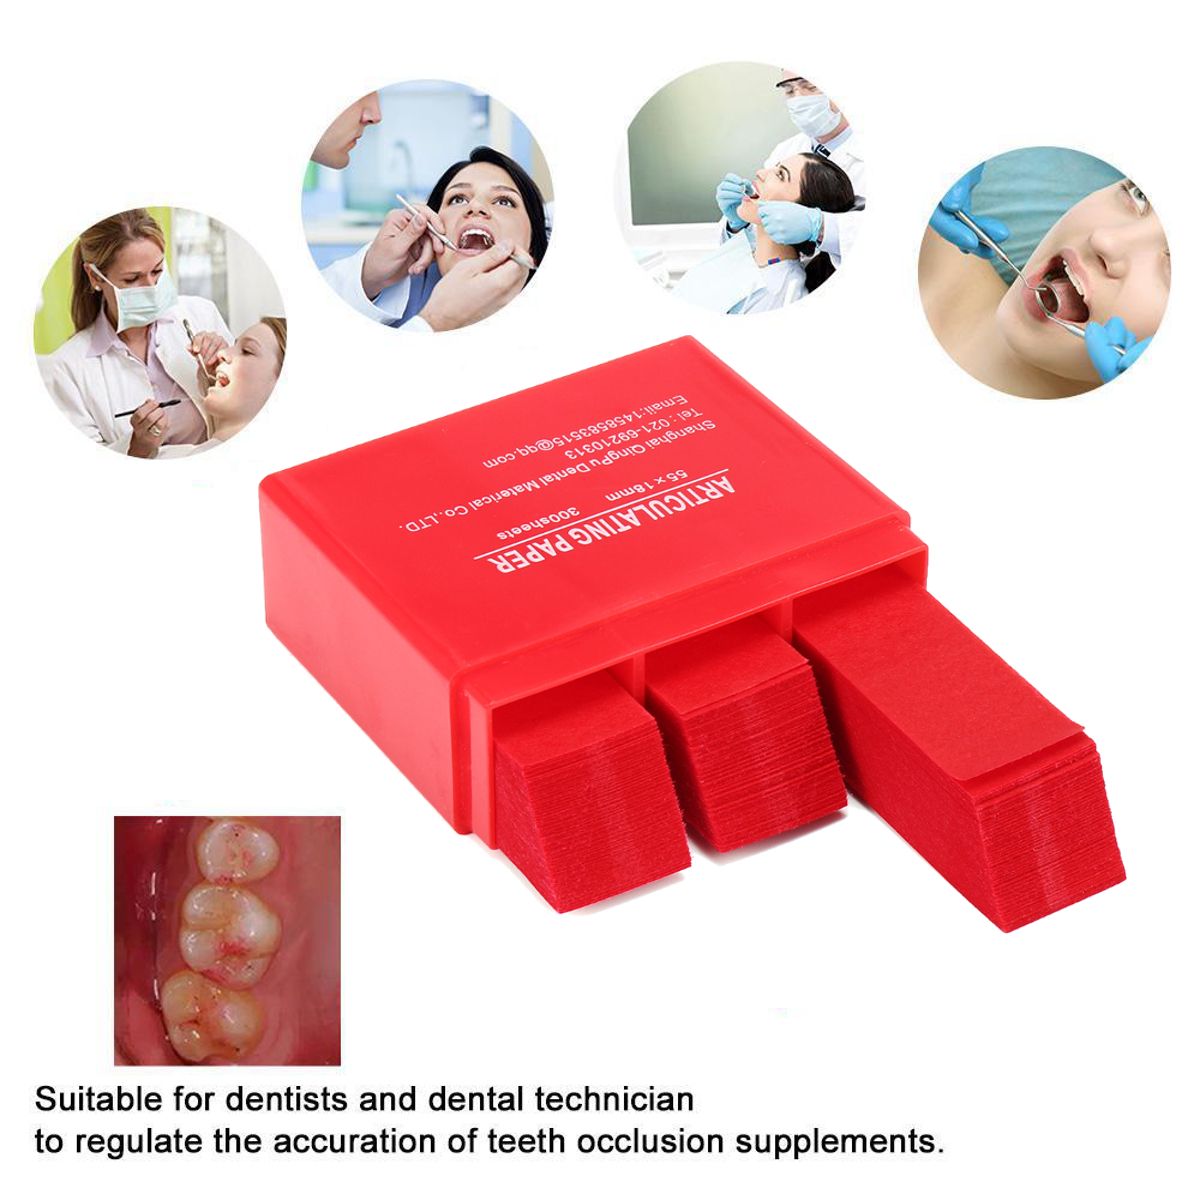 300-Sheets-Dental-Articulating-Paper-Dental-Lab-Products-Teeth-Care-Strips-Kit-Tools-1359950